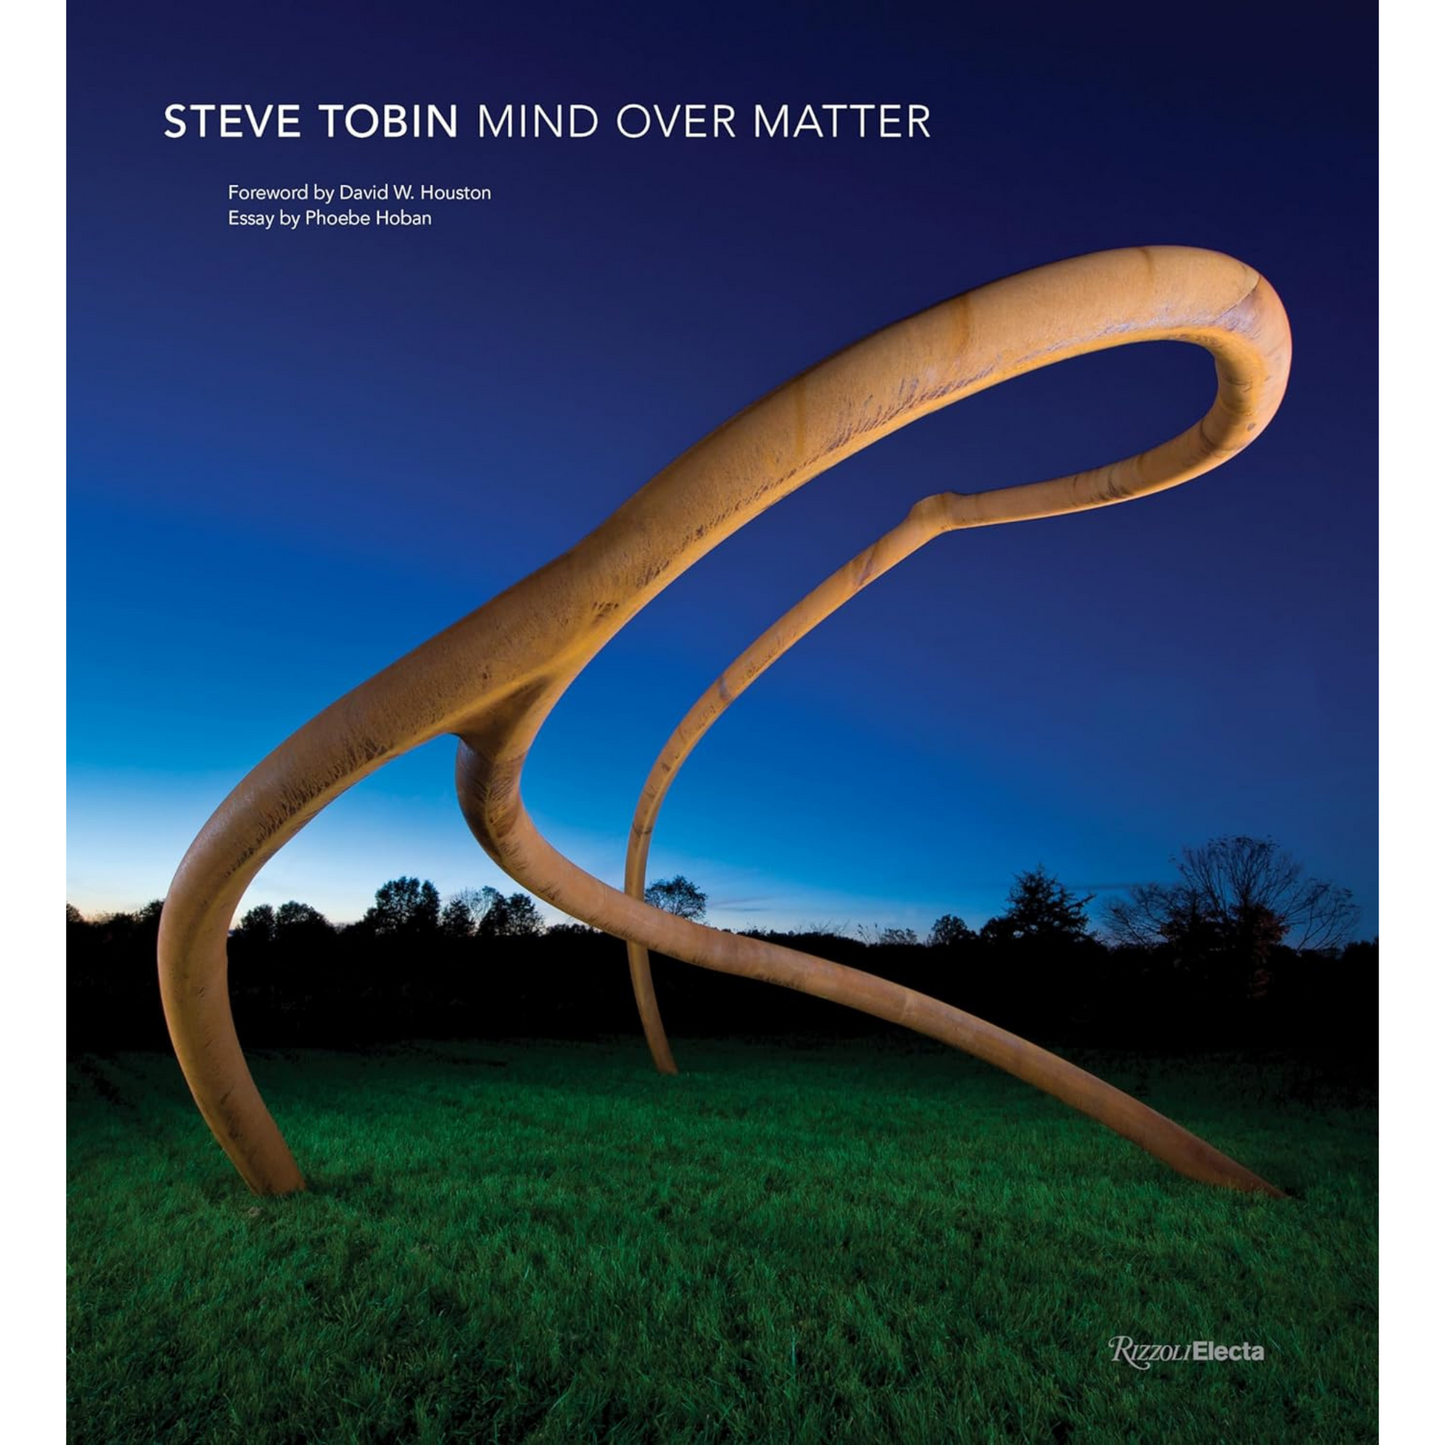 Load image into Gallery viewer, Cover of Steve Tobin book showing bendy wooden sculpture.
